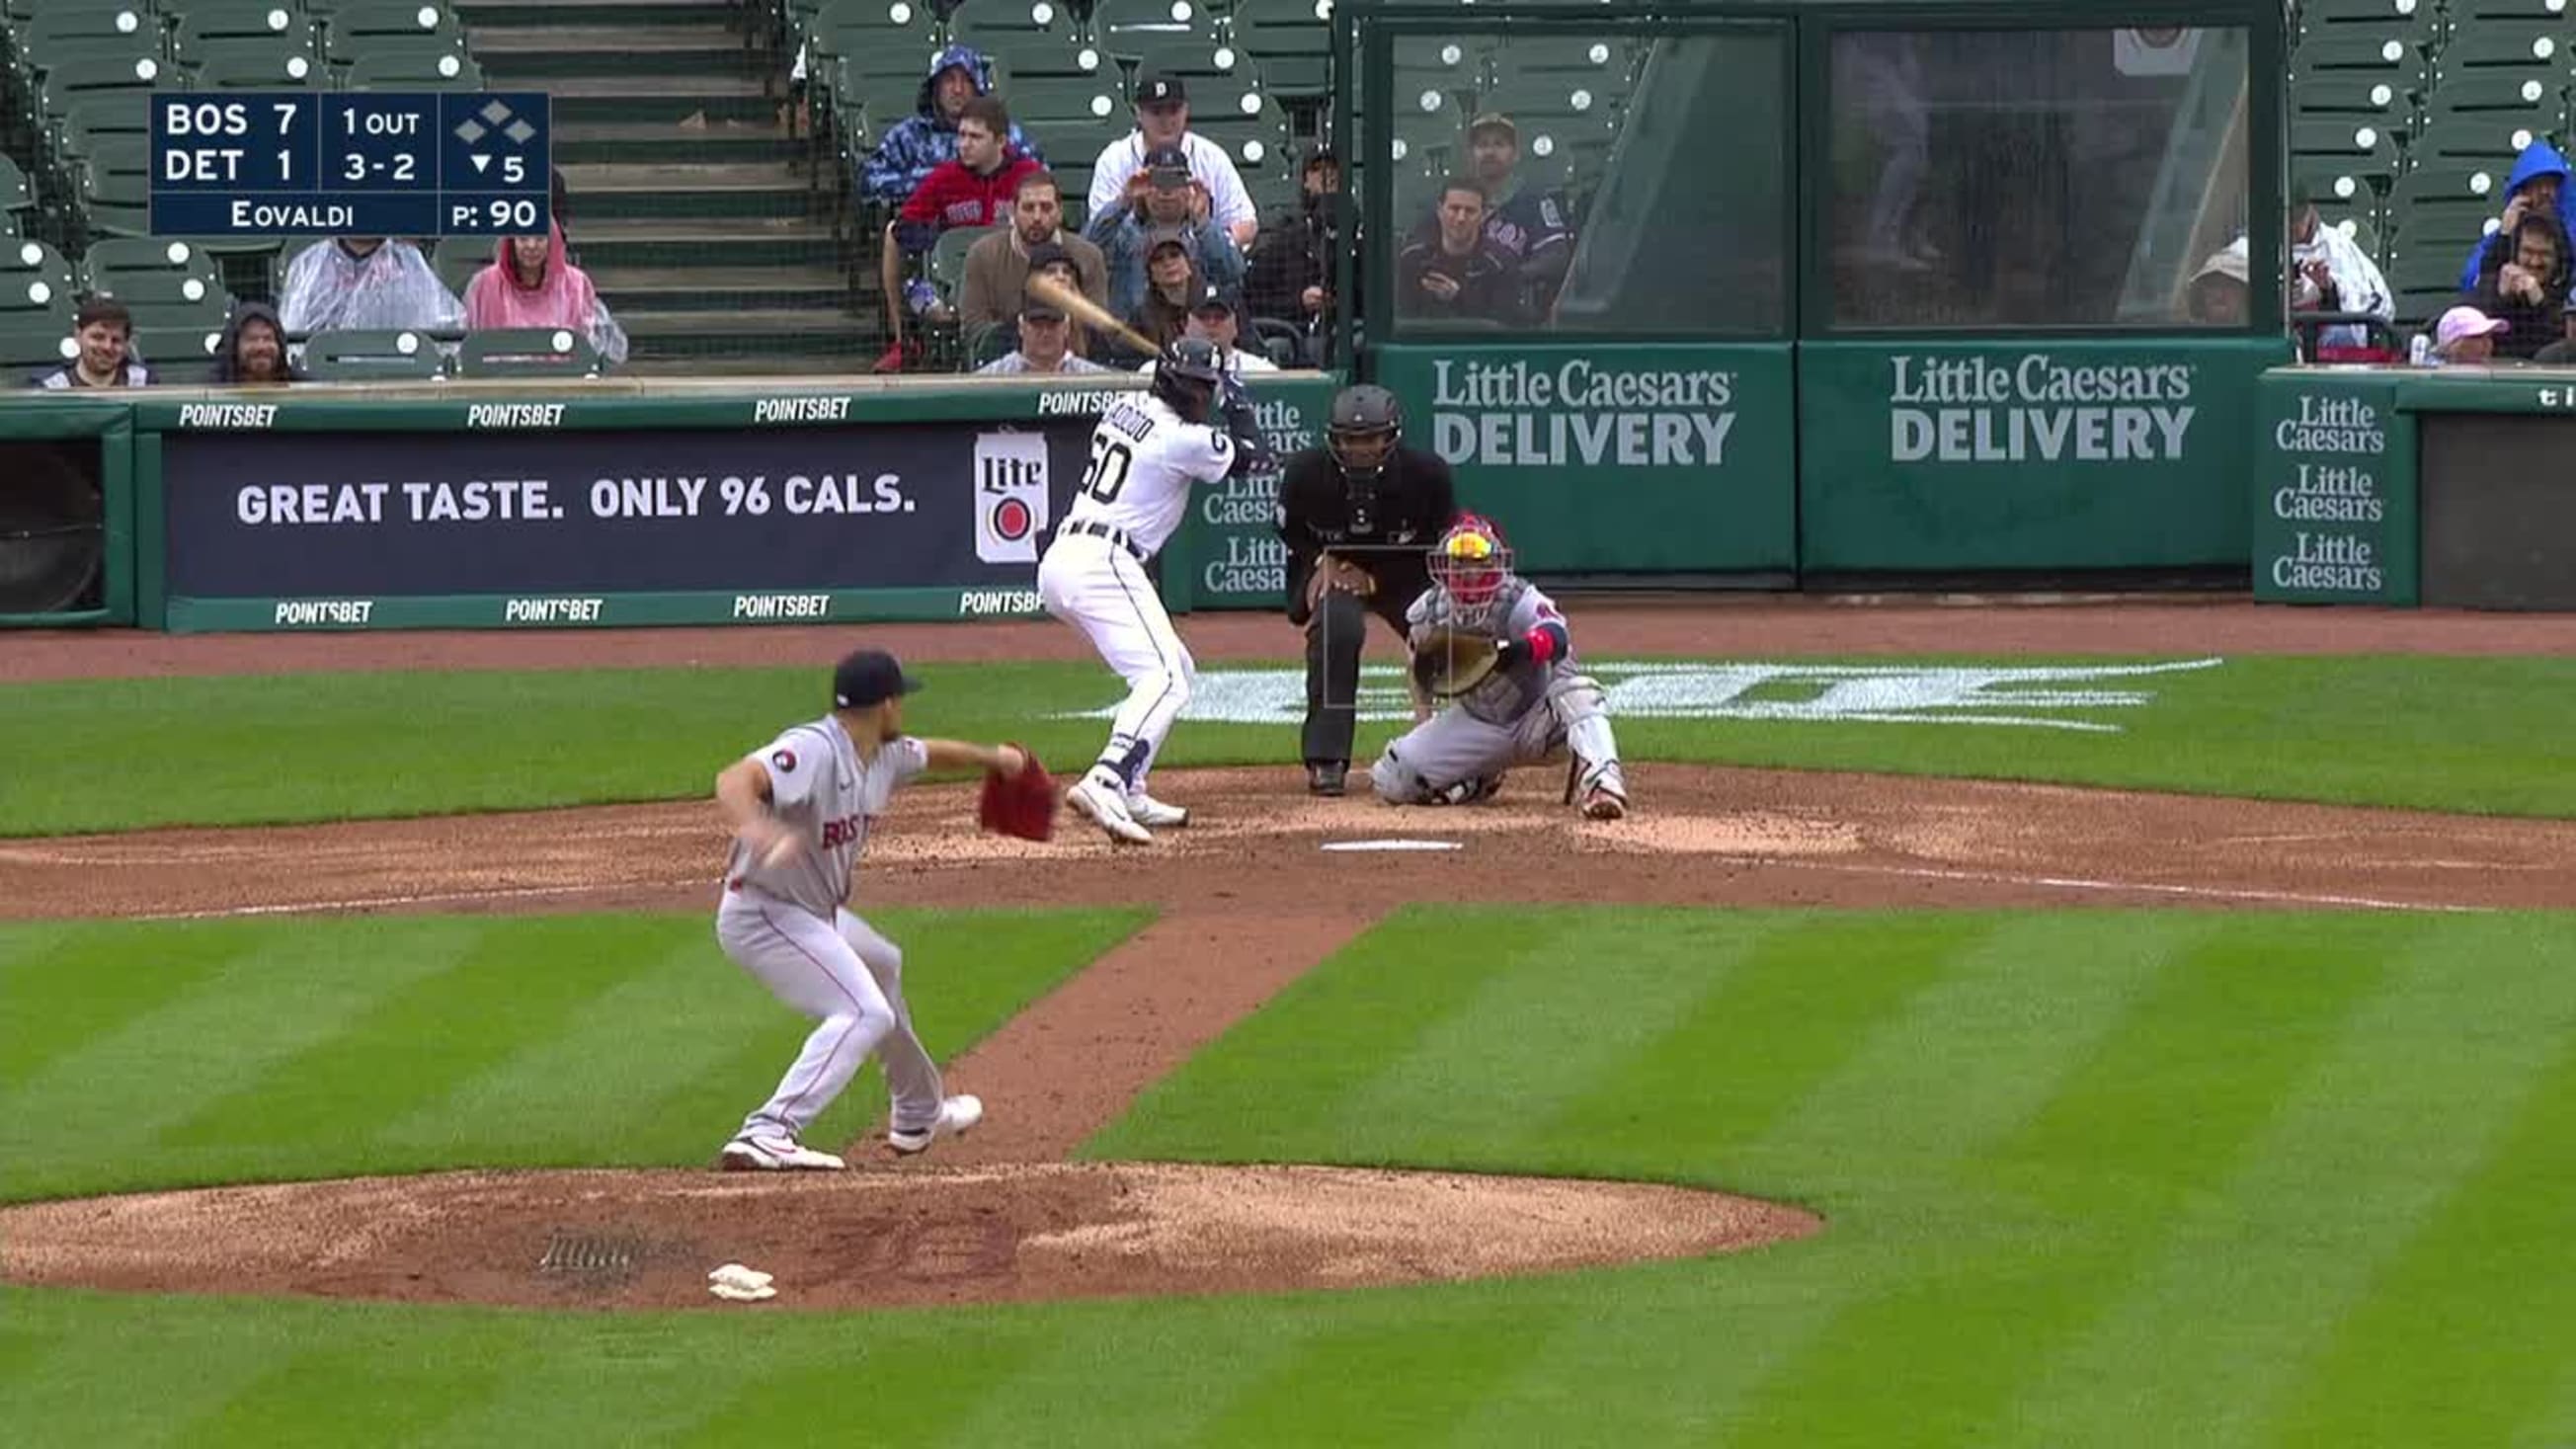 Highlight] Akil Baddoo crushes an 0-2 fastball from Dylan Cease for a grand  slam, giving the Tigers a 4-1 lead! : r/baseball